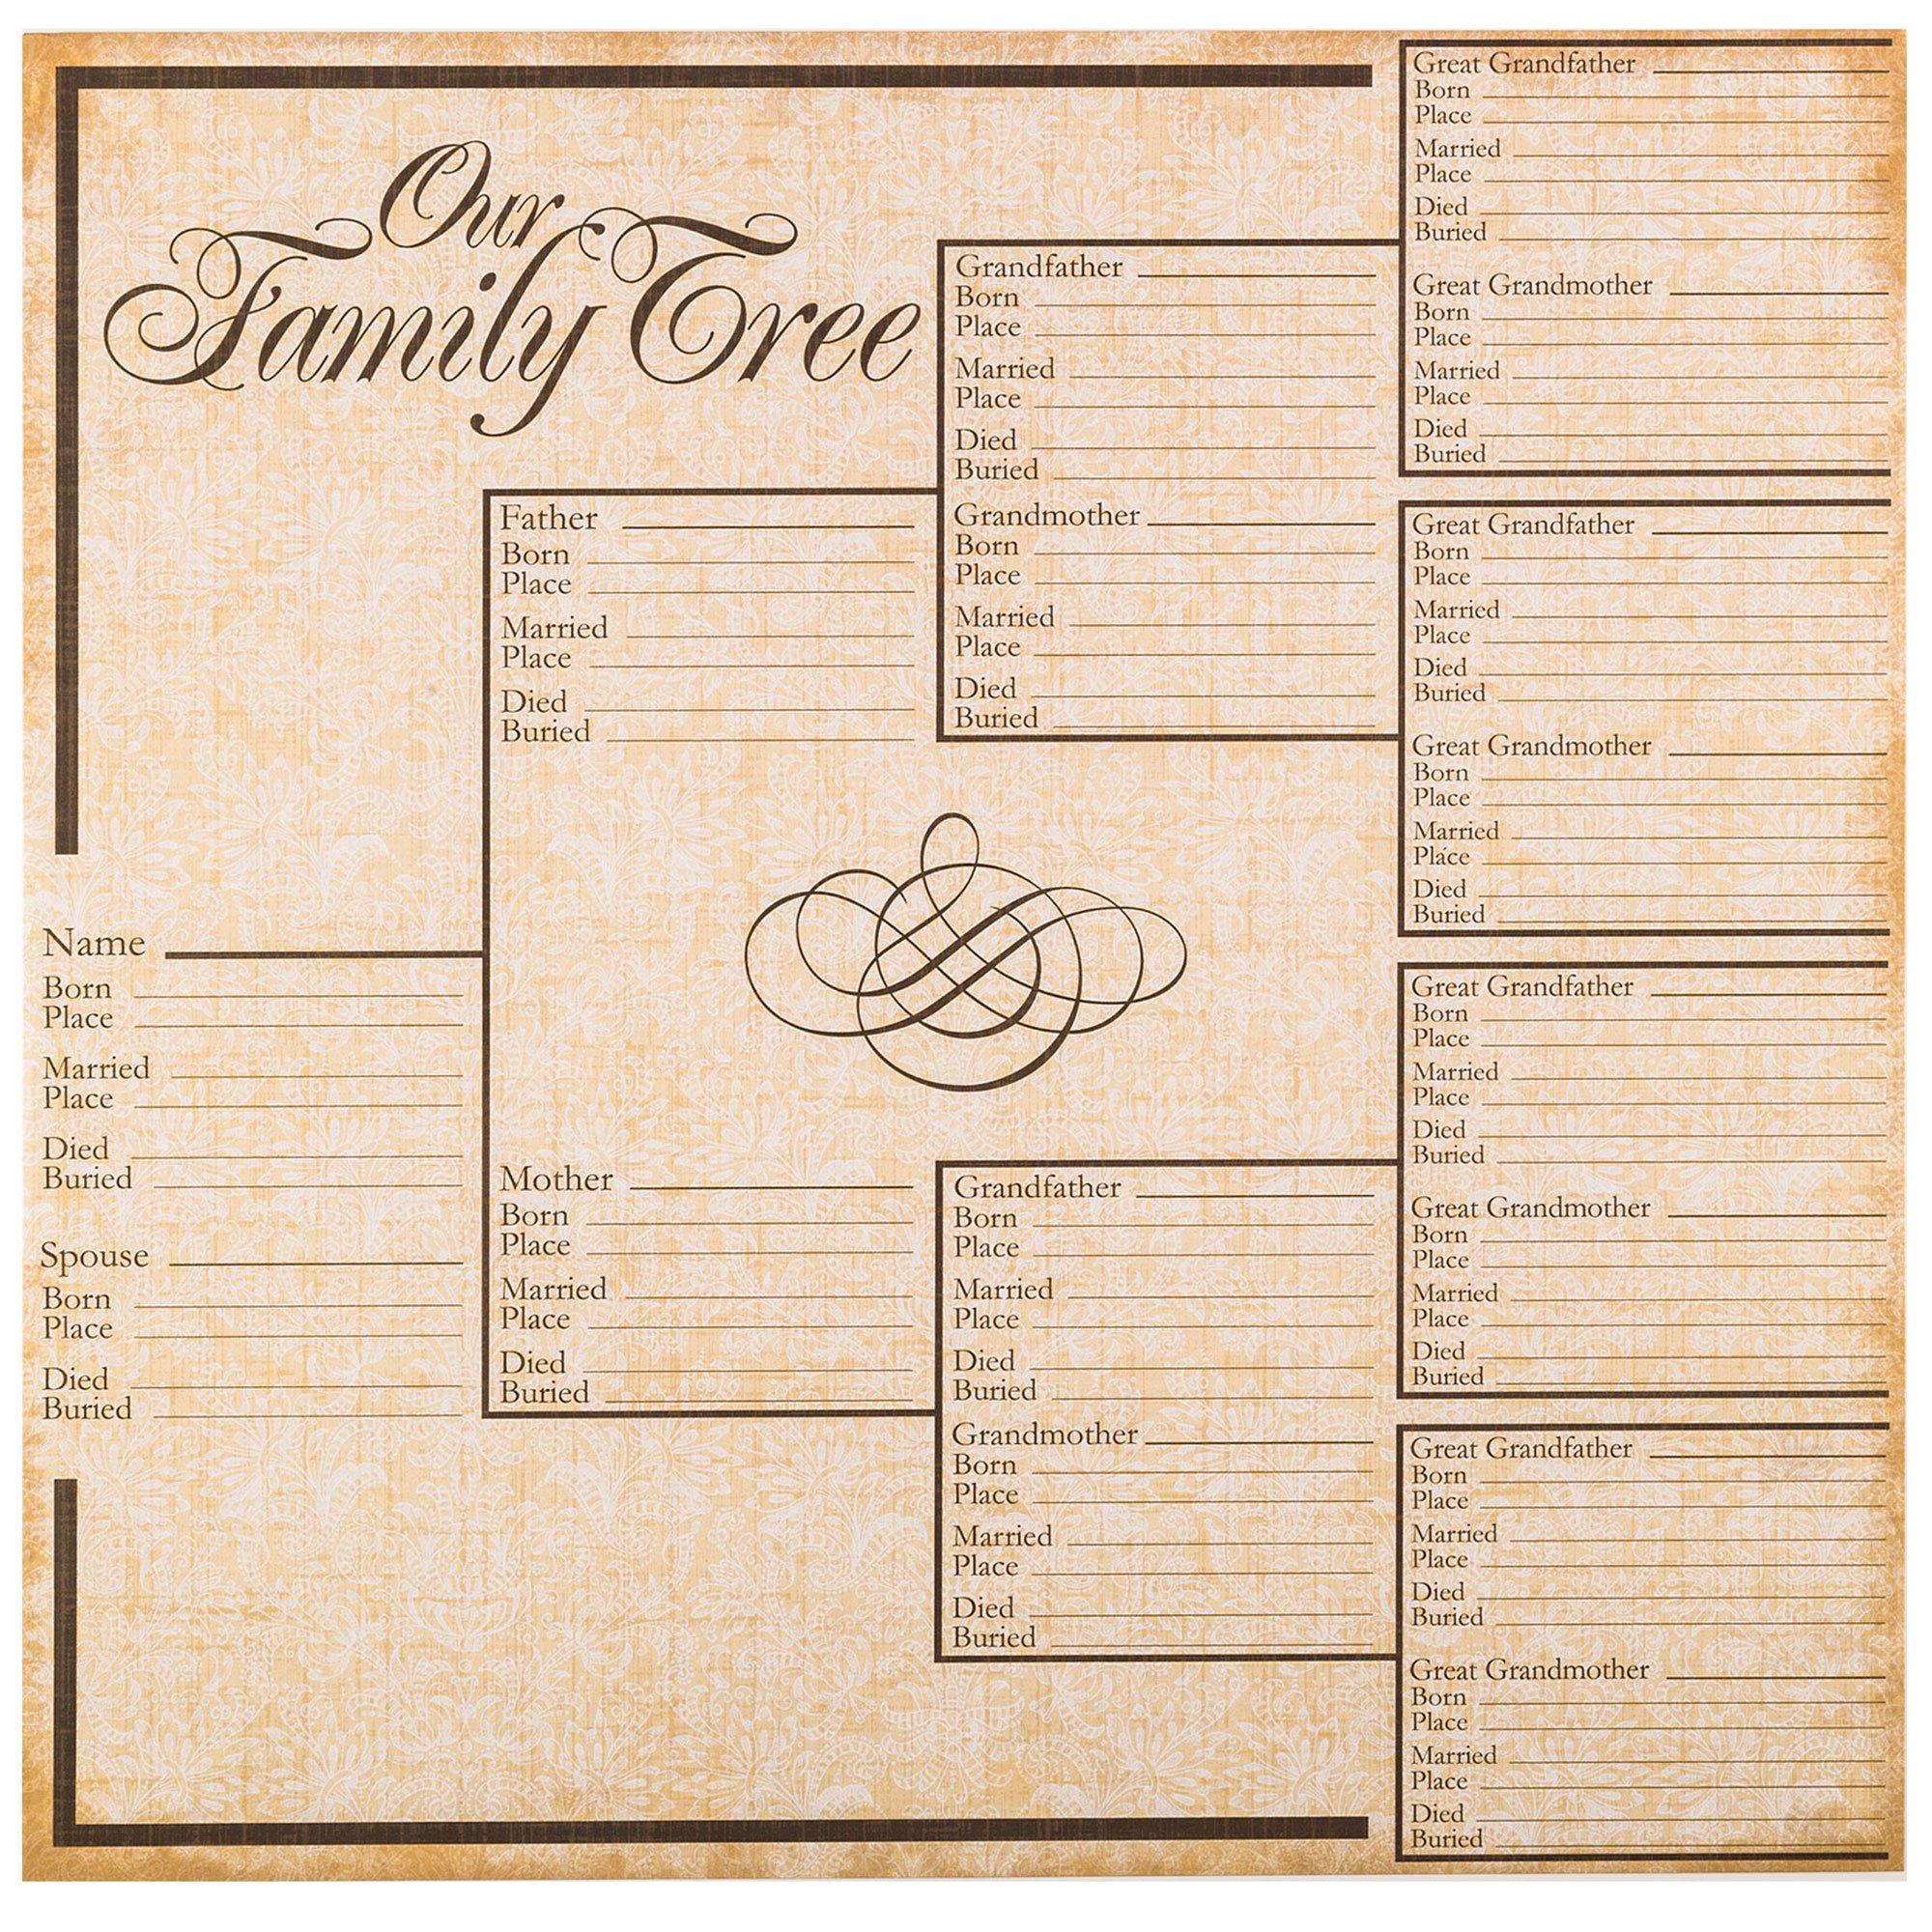 Ancestry Tracker A4 PAPER SIZE Genealogy Planner Inserts Printable With  Family Tree Pages, Organizer, to Find List and Much More 